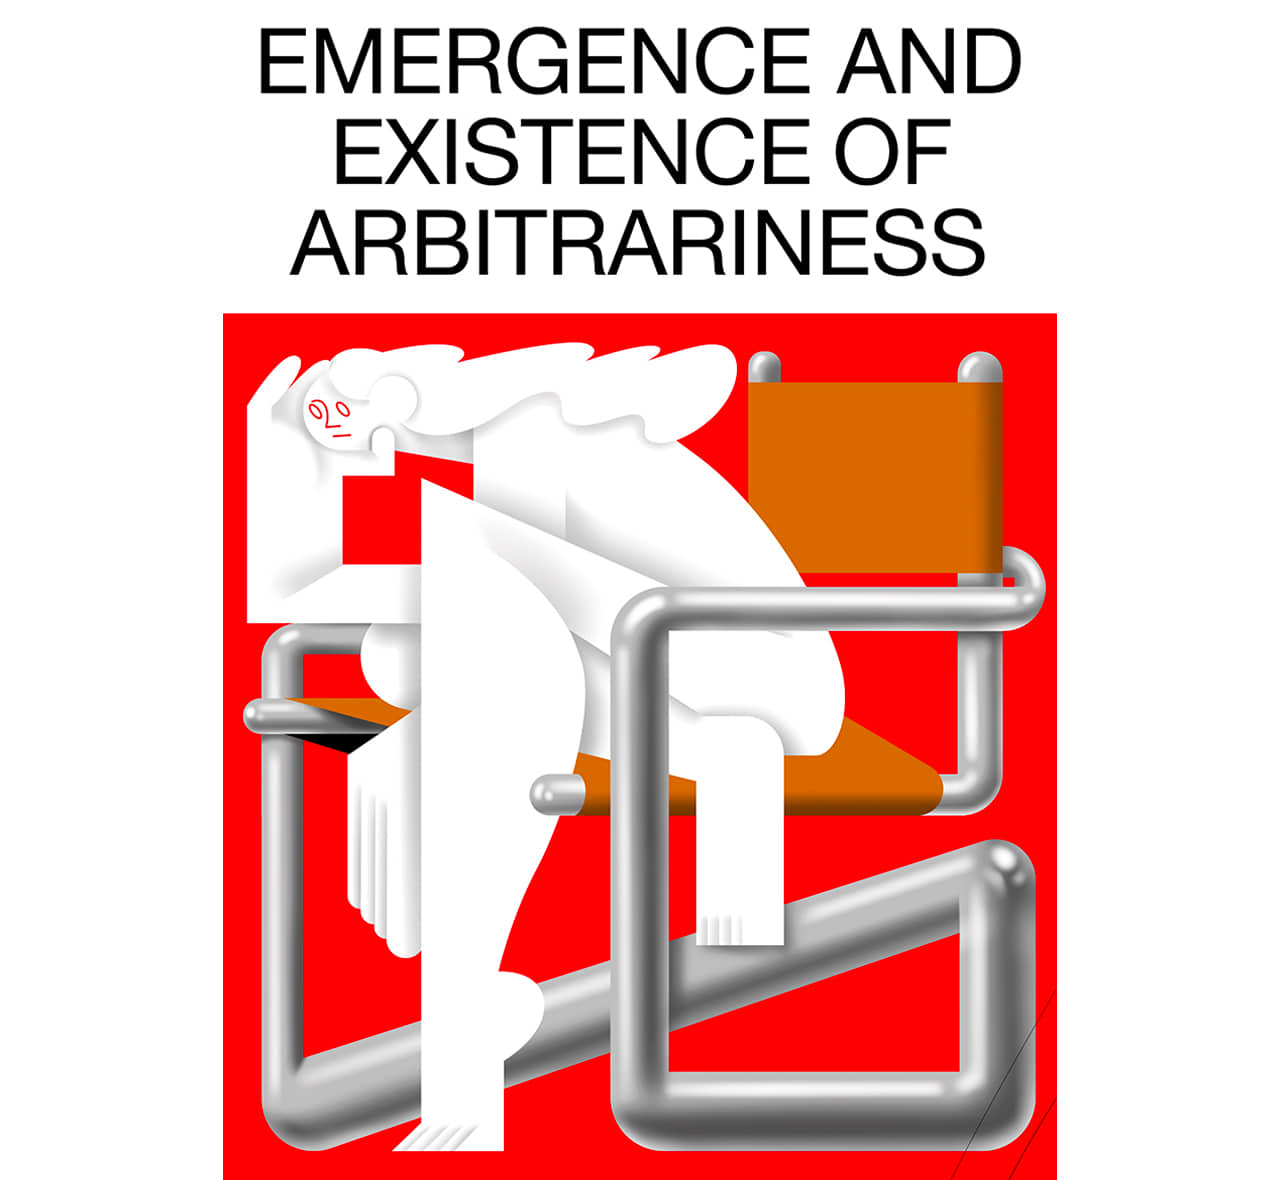 Emergence and Existence of Arbitrariness, Exhibition, 2020